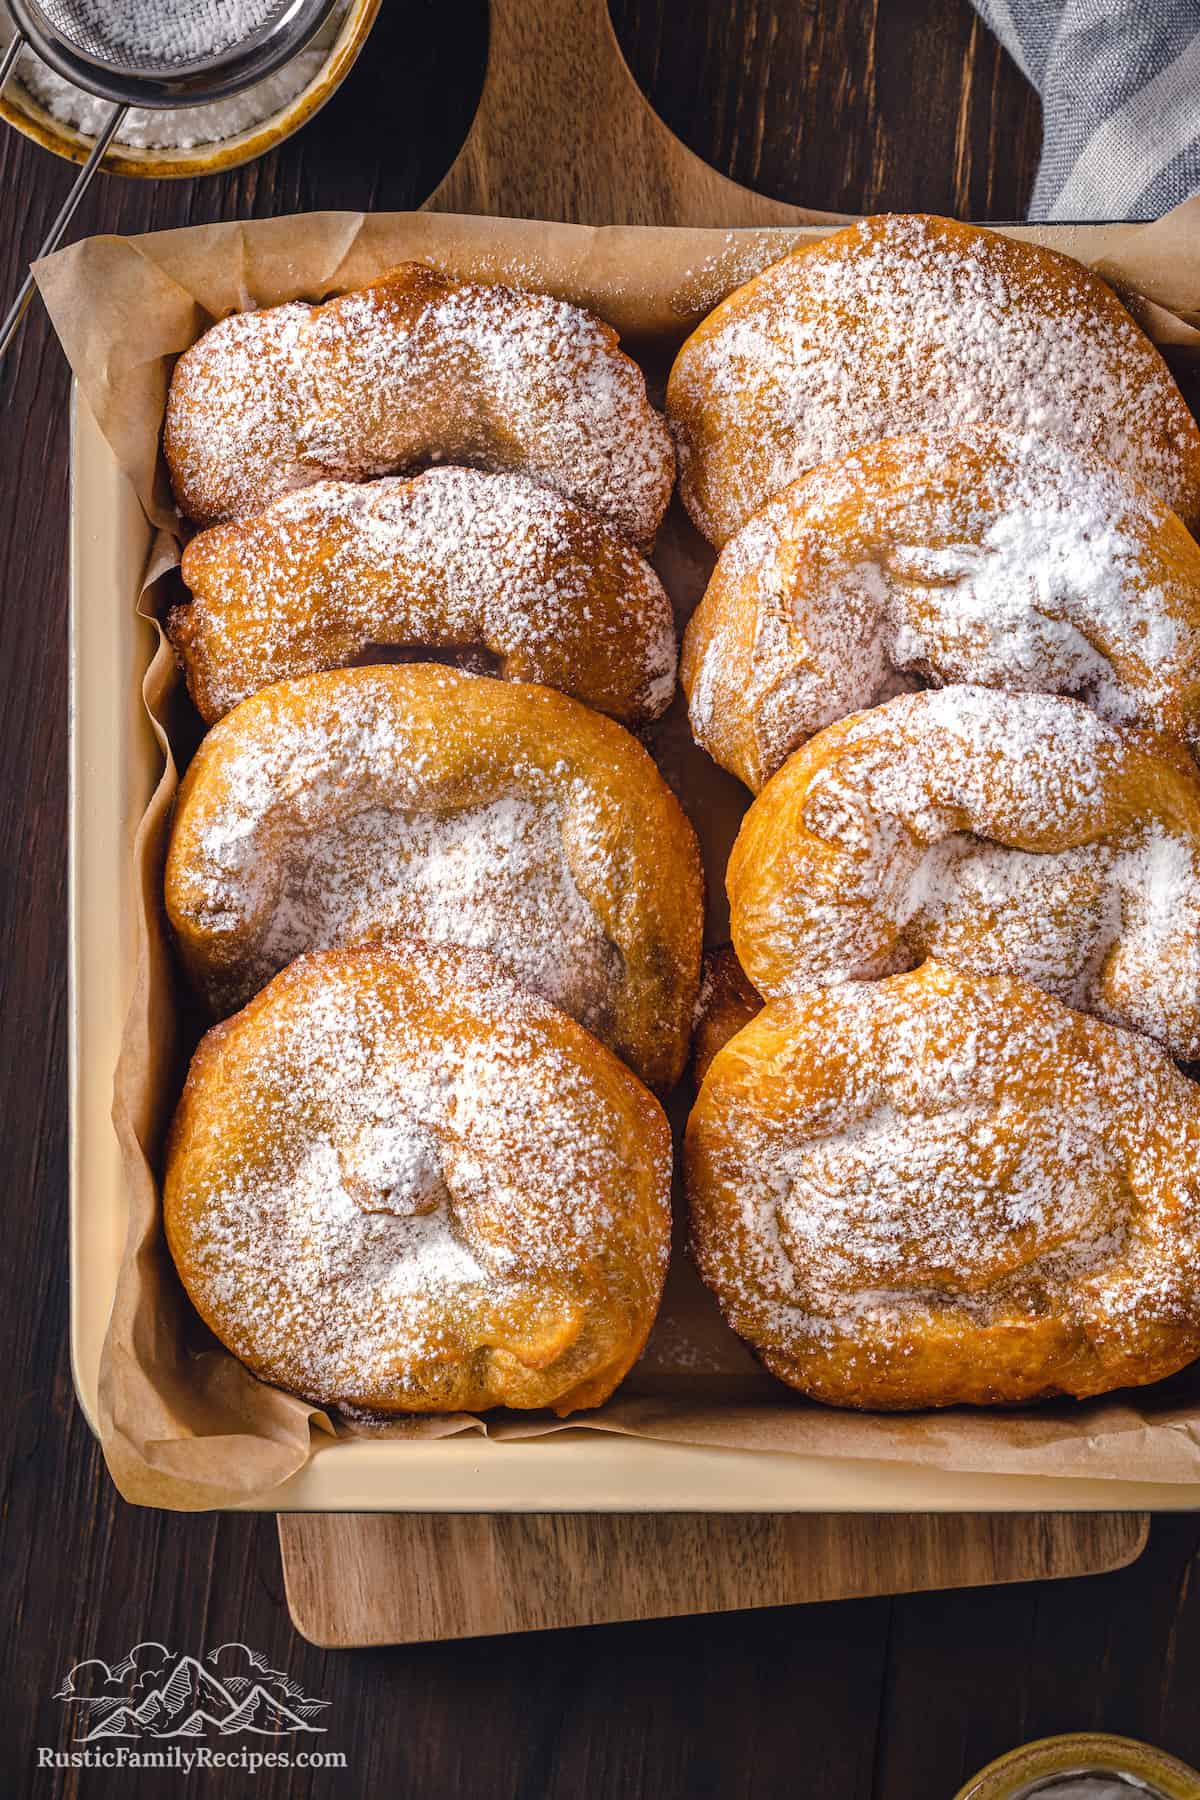 Two rows of hojaldres dusted with powdered sugar, nestled inside a square basket.